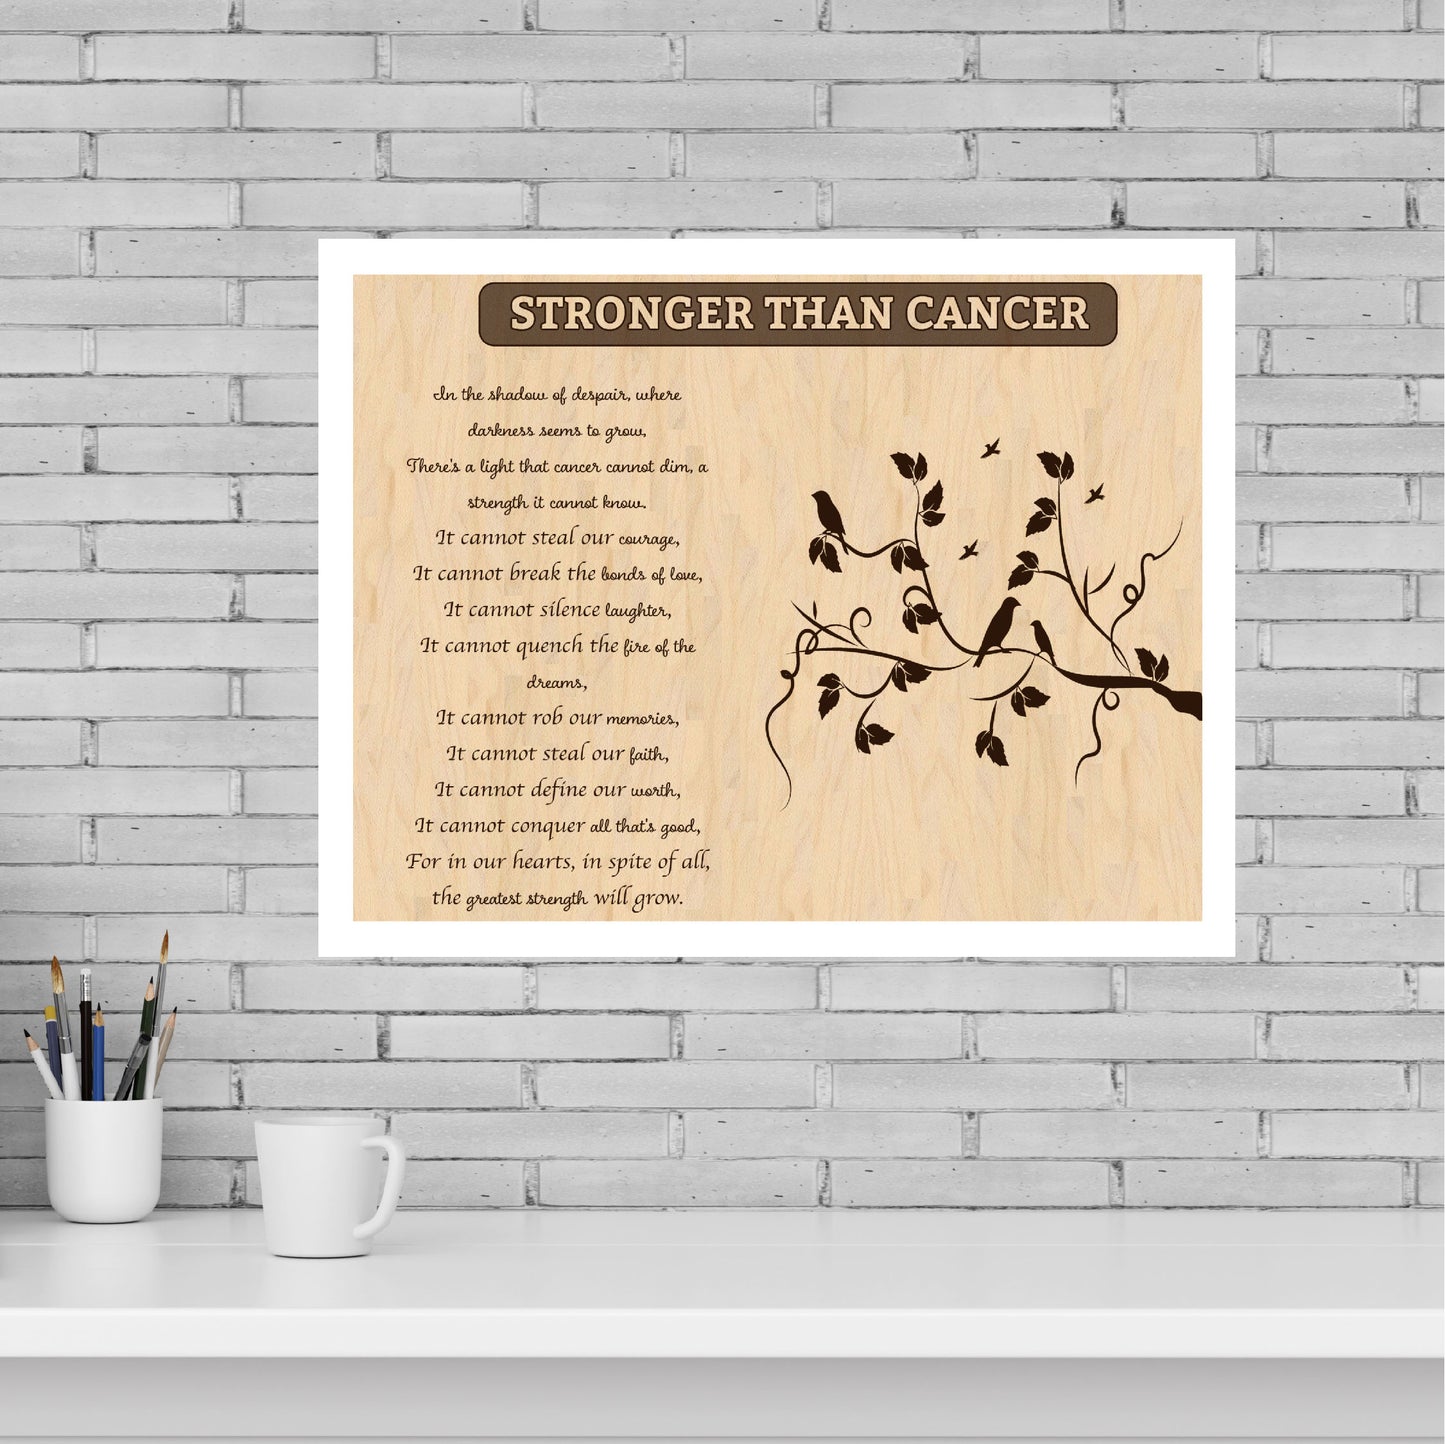 Cancer Care Gift, Gift, Cancer Gift, gift for sick person, custom gift, cancer care gift plaque, get well soon gift, gift for mom